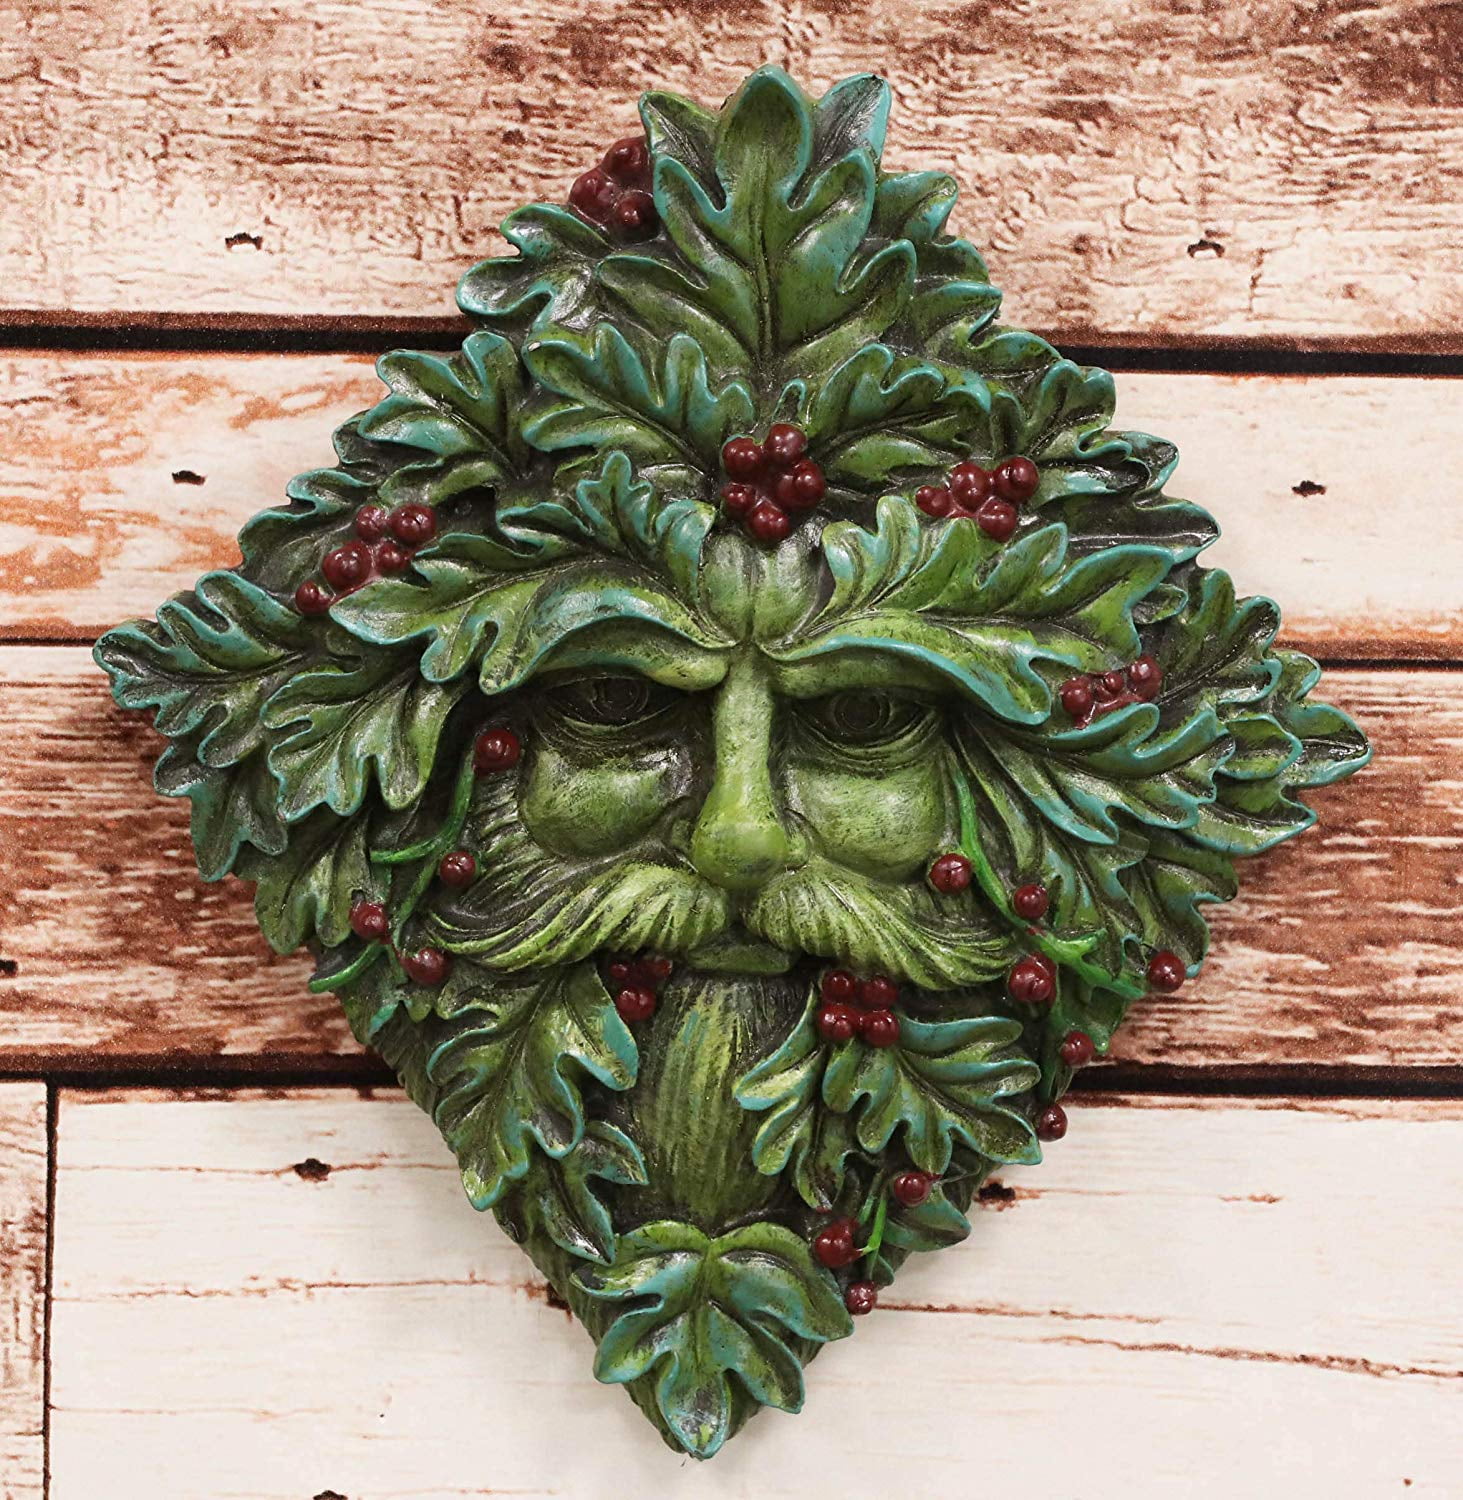 Ebros Gift Greenman Face Resin Figurine Wall Plaque 